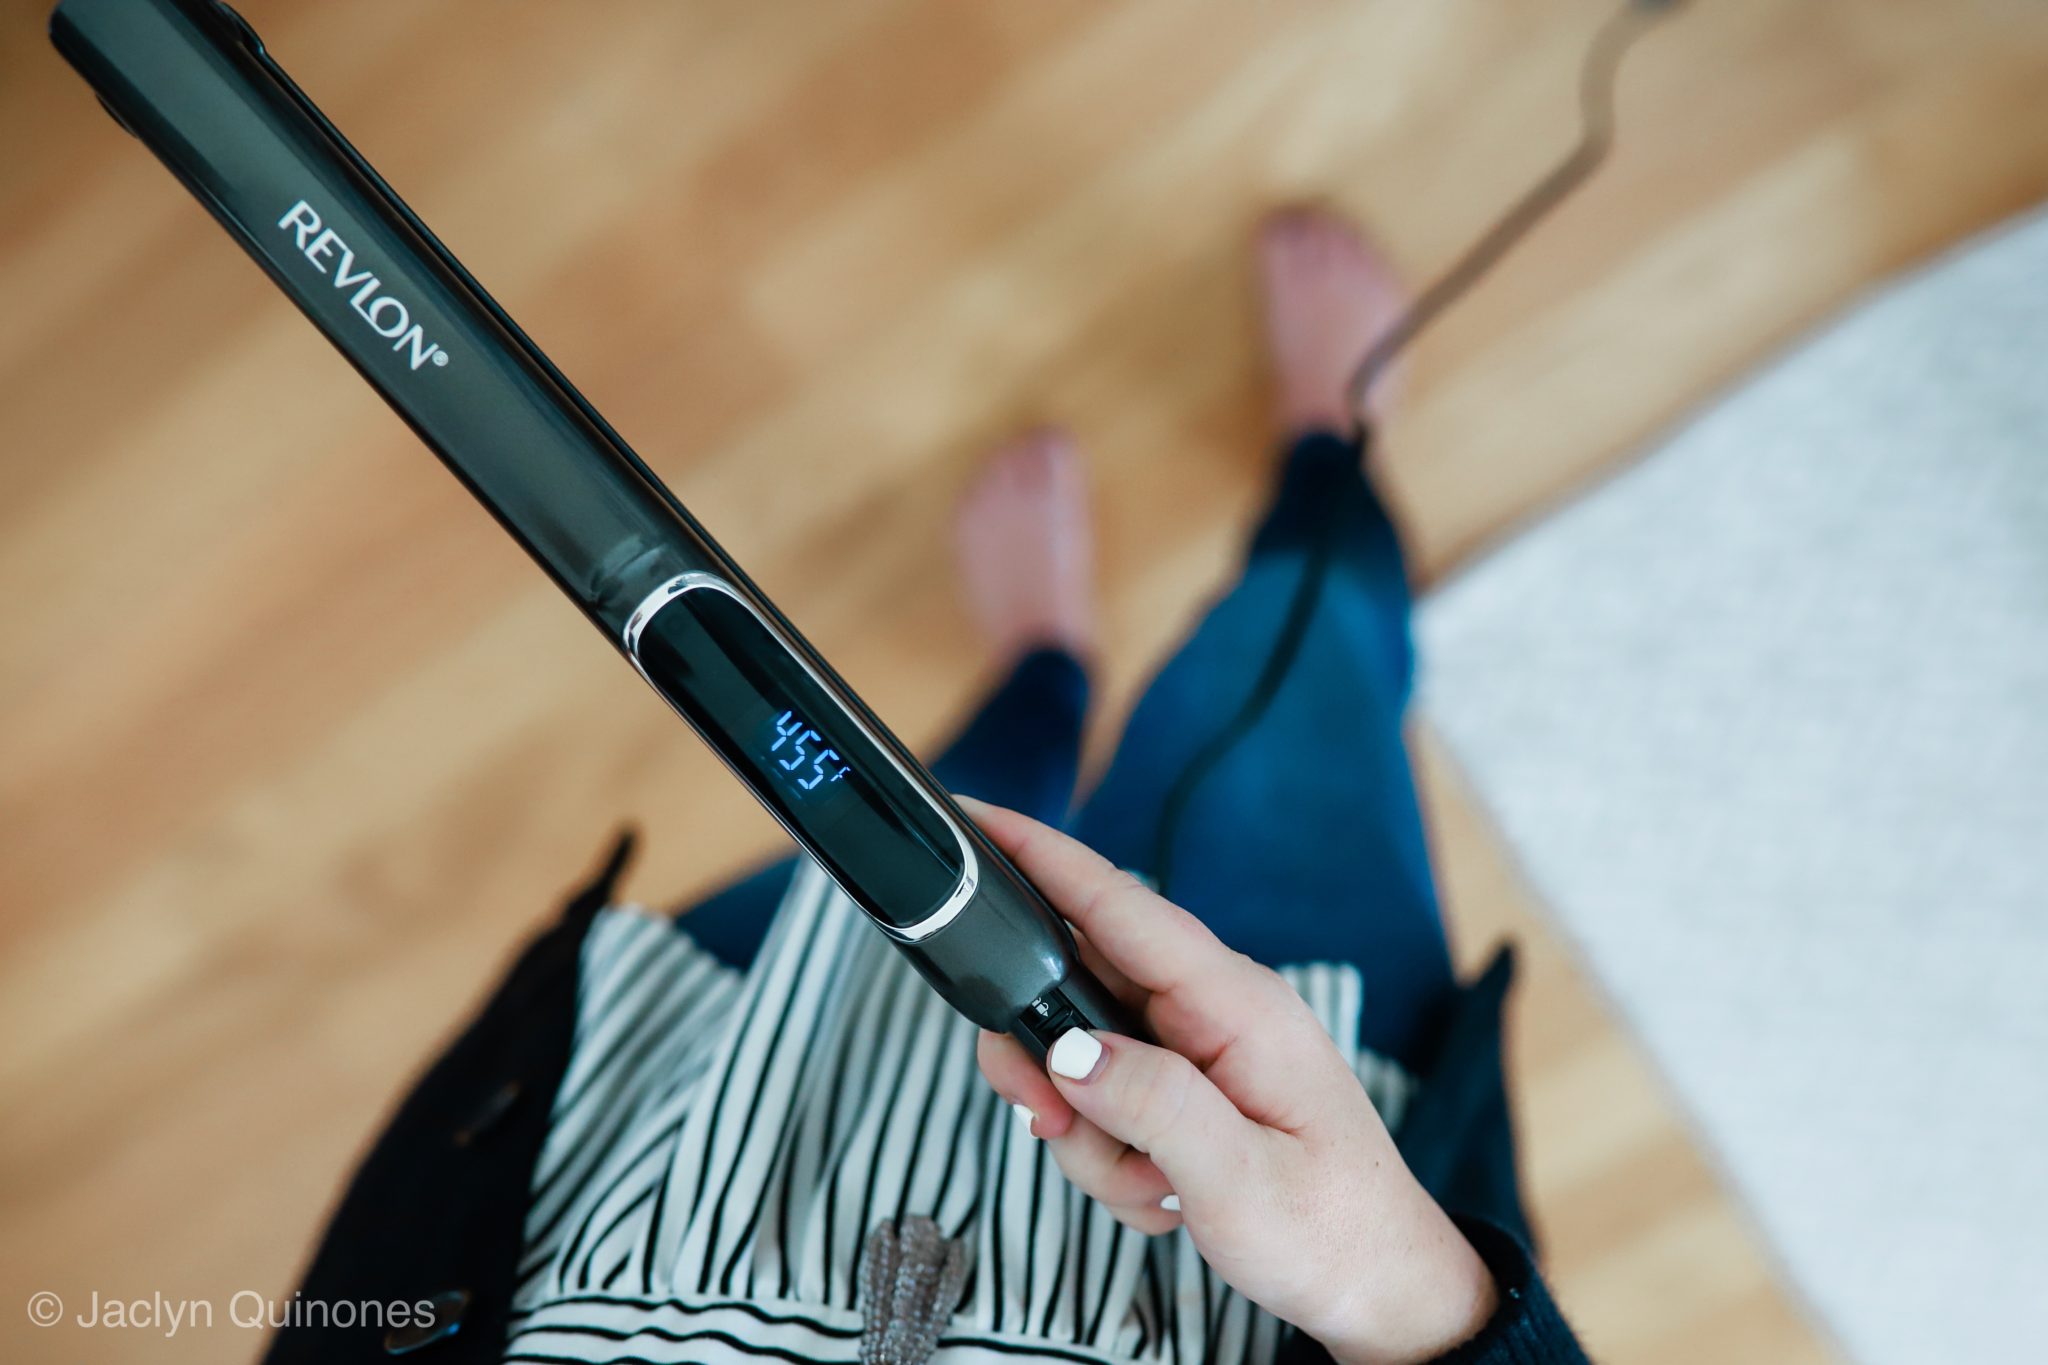 HOW TO GET FAST FLAT IRON CURLS | TAMPA LIFESTYLE AND MOM BLOG